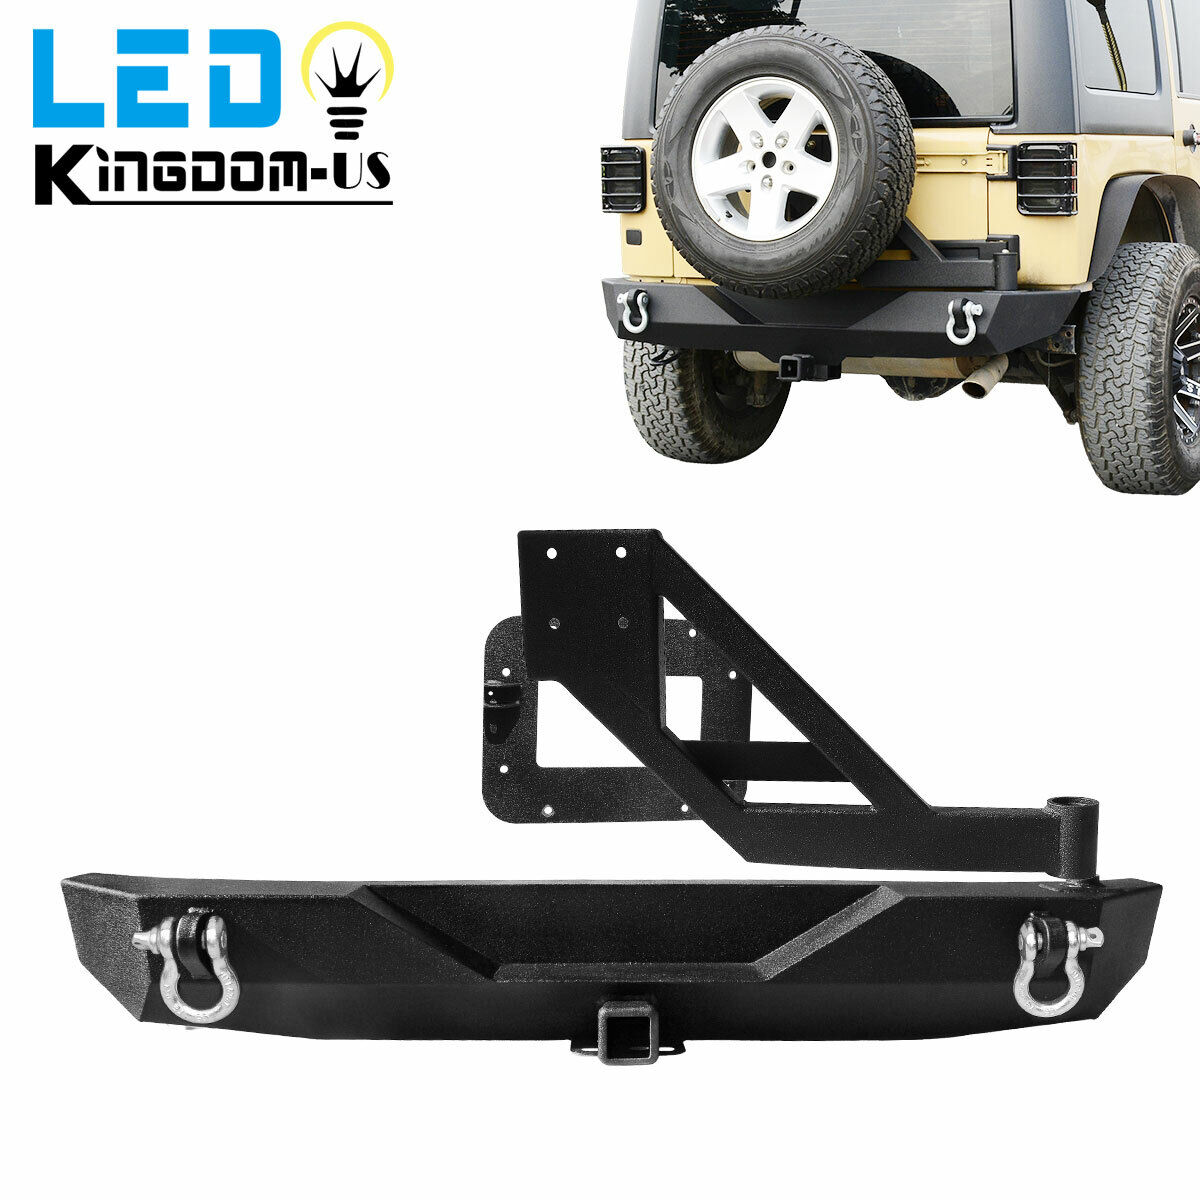 Textured Rear Bumper w/ Tire Carrier for 2007-2018 Jeep Wrangler JK Unlimited